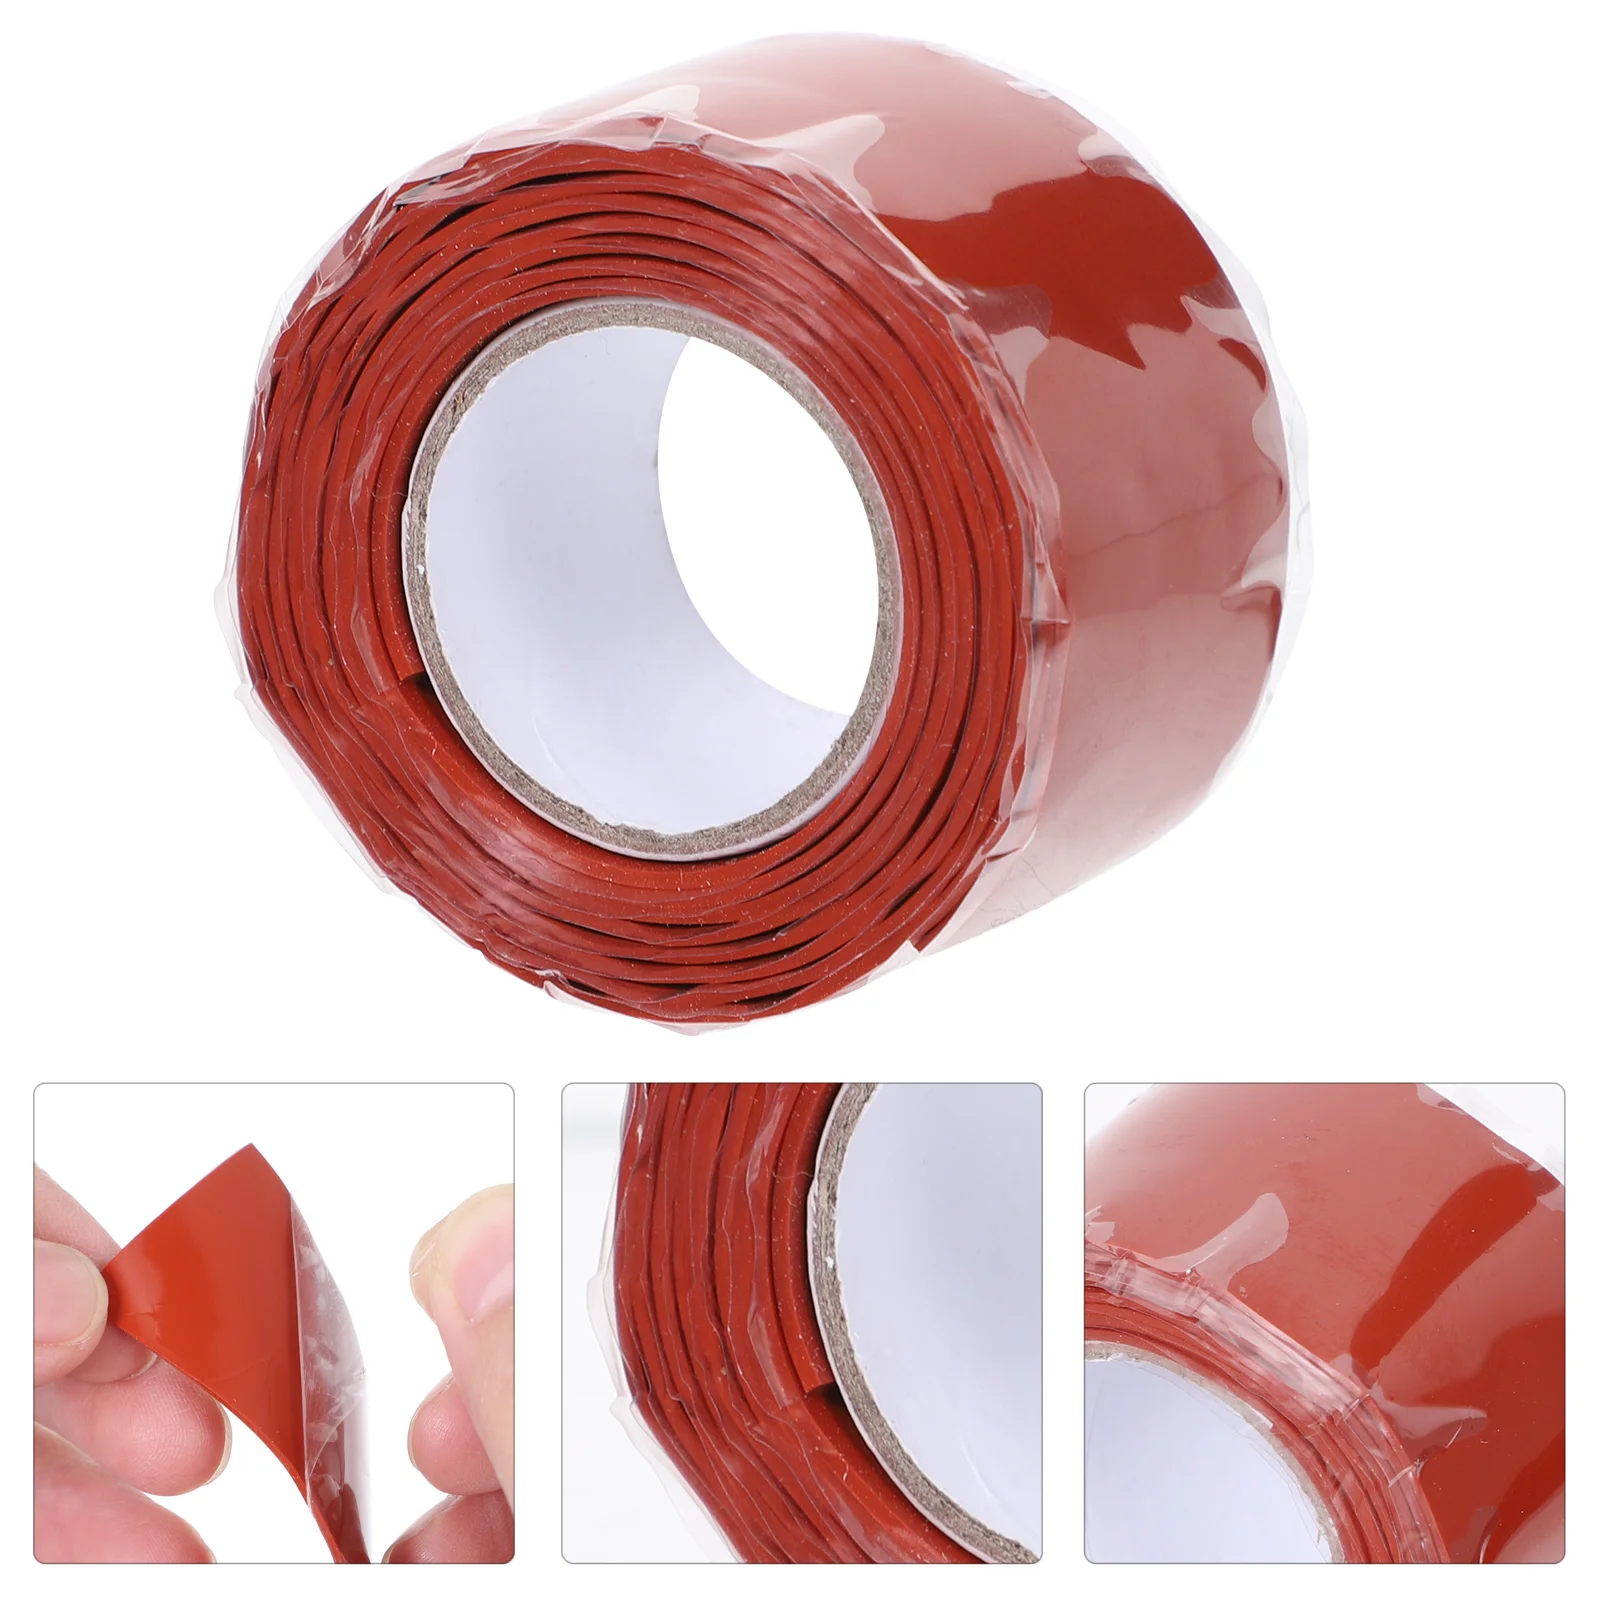 

Waterproof Repair Tape Duct Black Plumbers Leaky Pipes Sealing Seam Outdoor Silicone Rubber Sealant